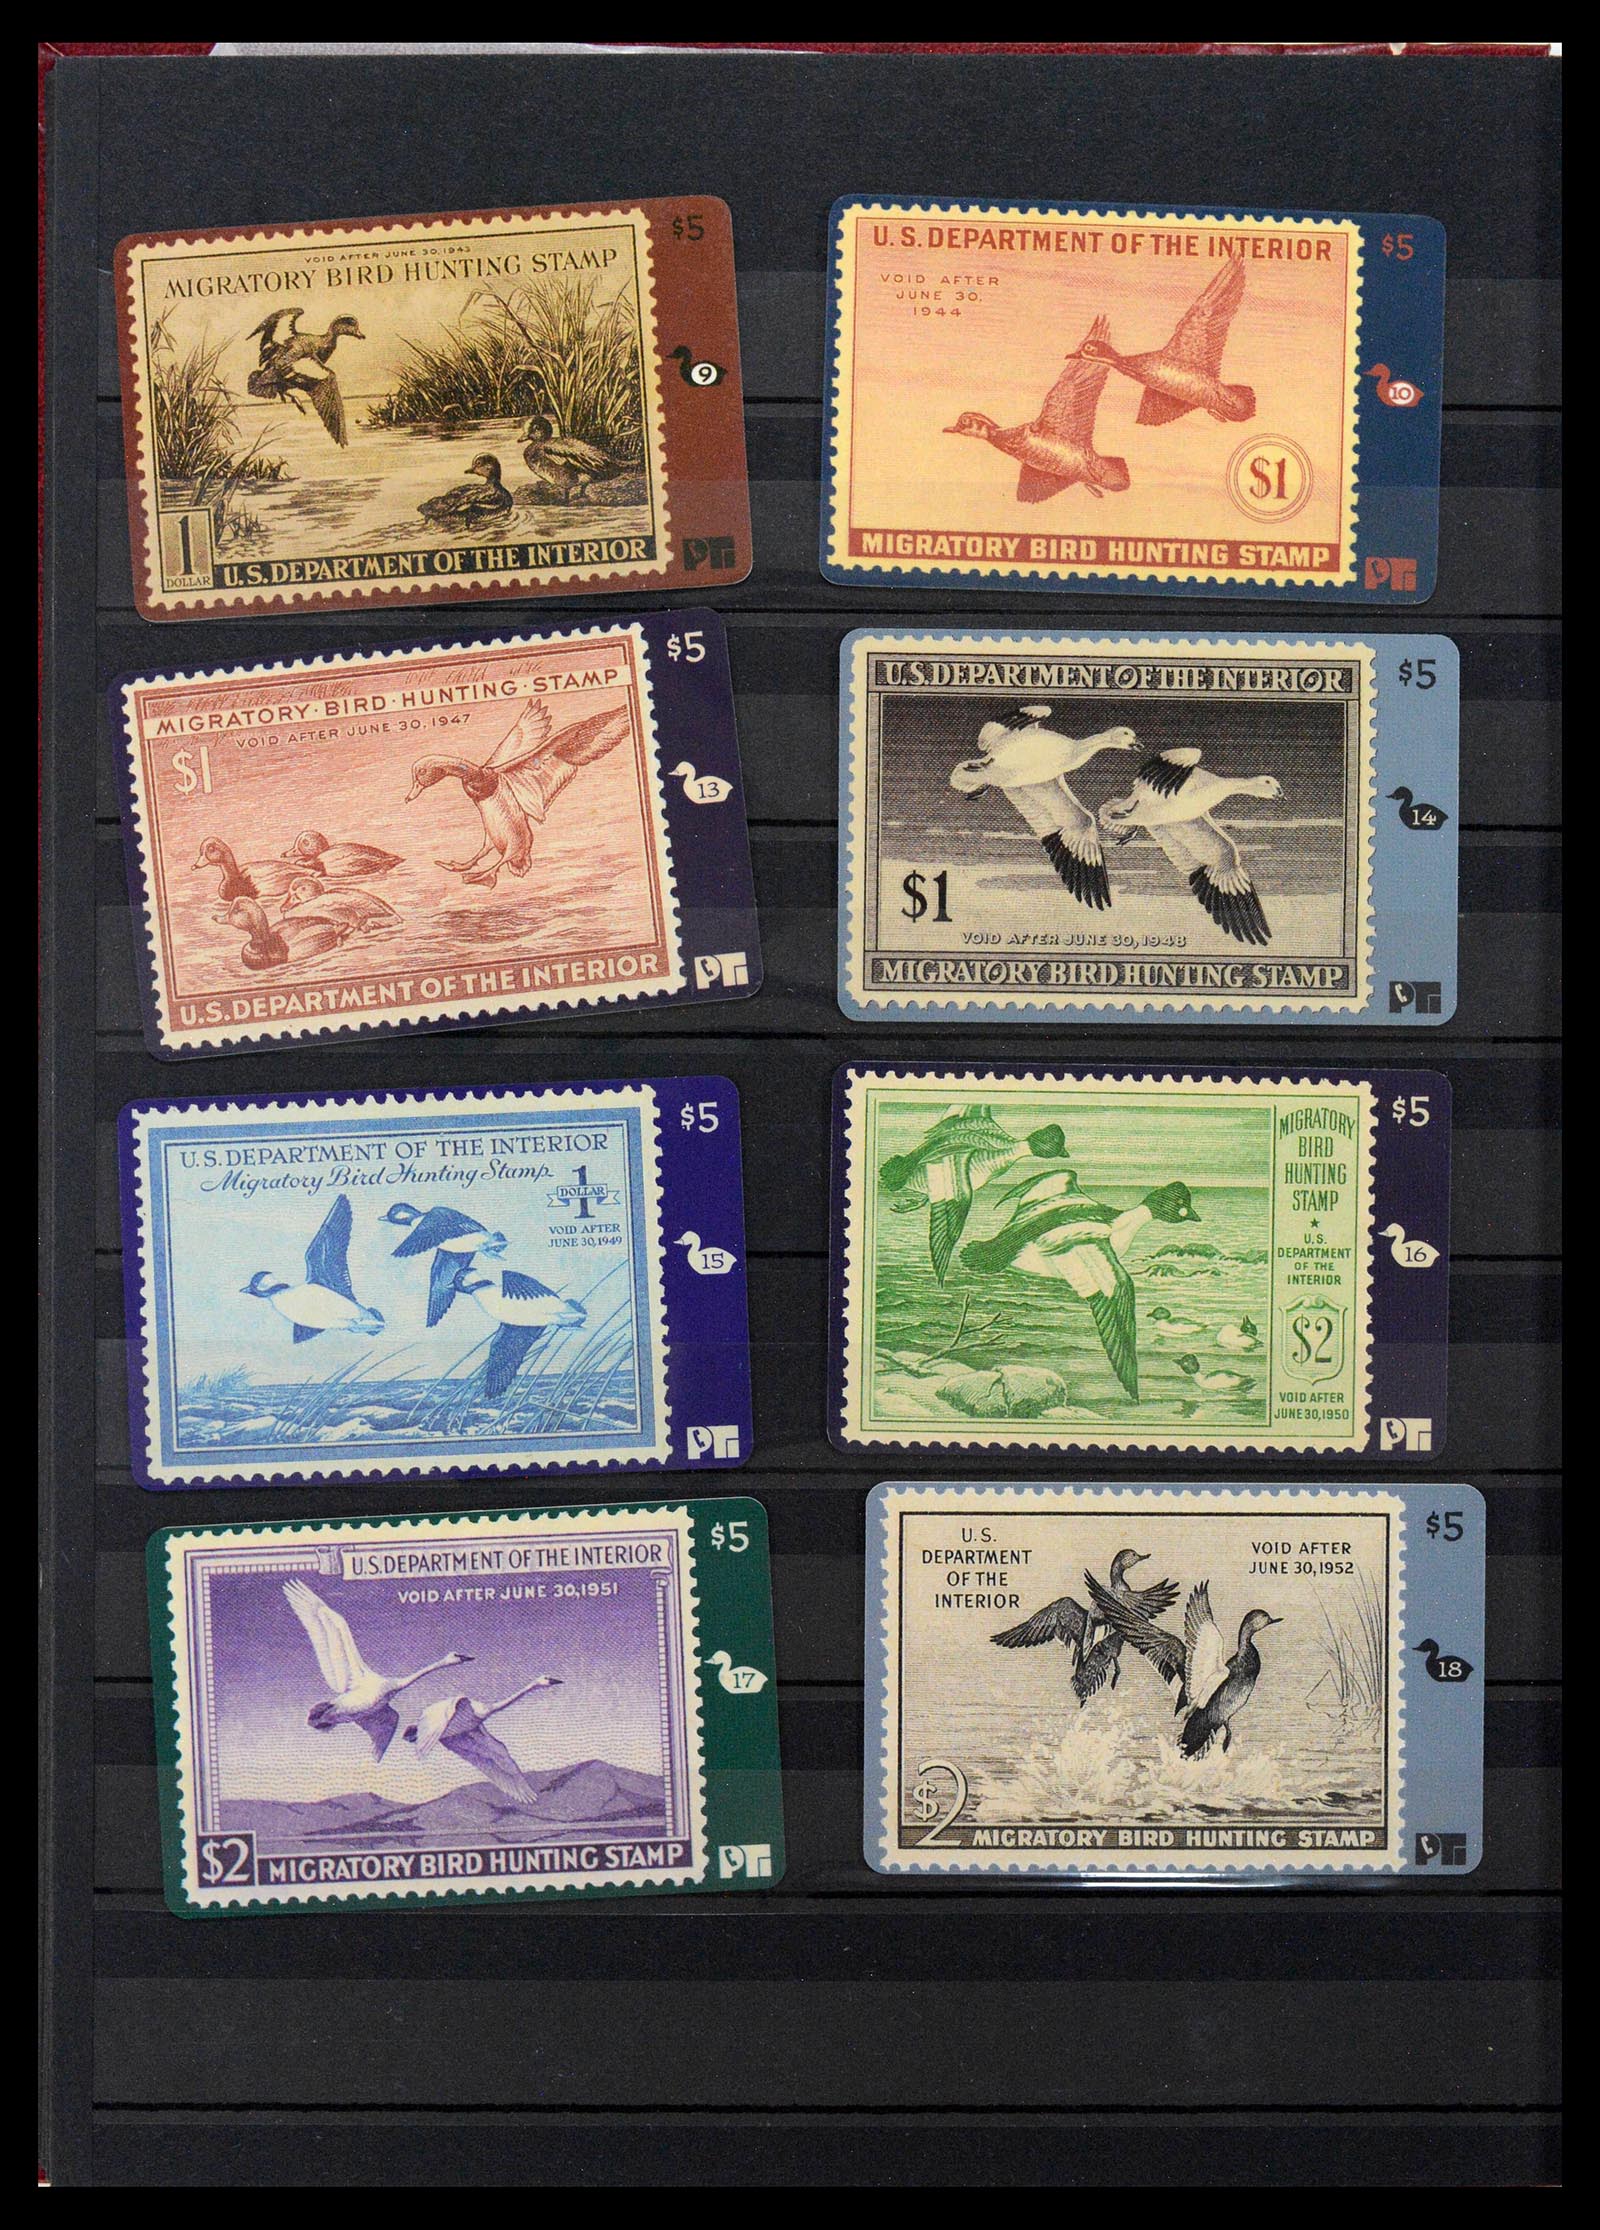 39426 0020 - Stamp collection 39426 USA duckstamps 1934-2007.